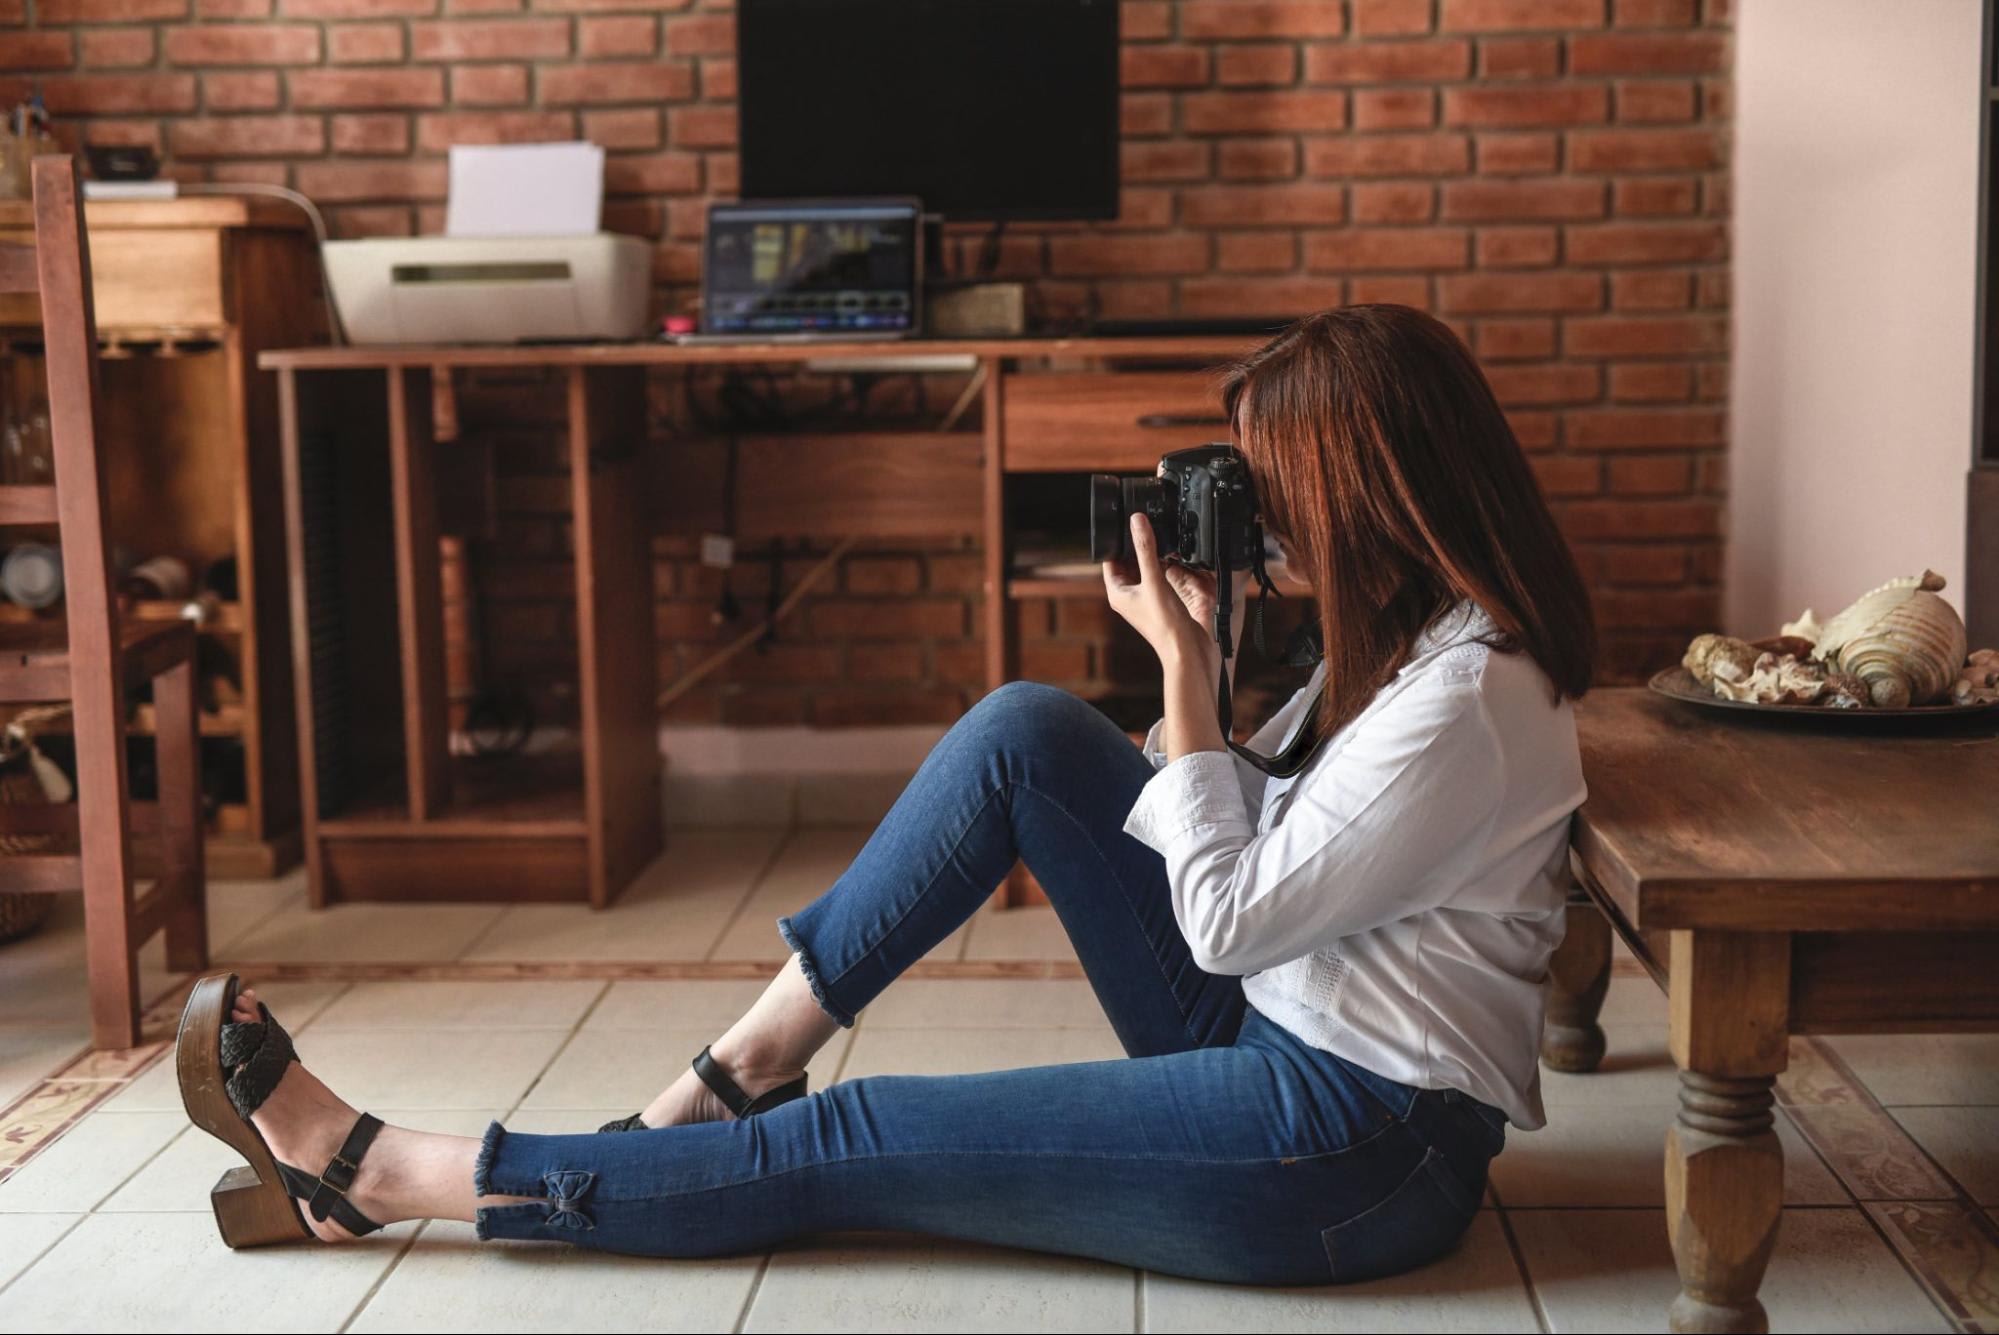 Woman sitting on floor taking a photo